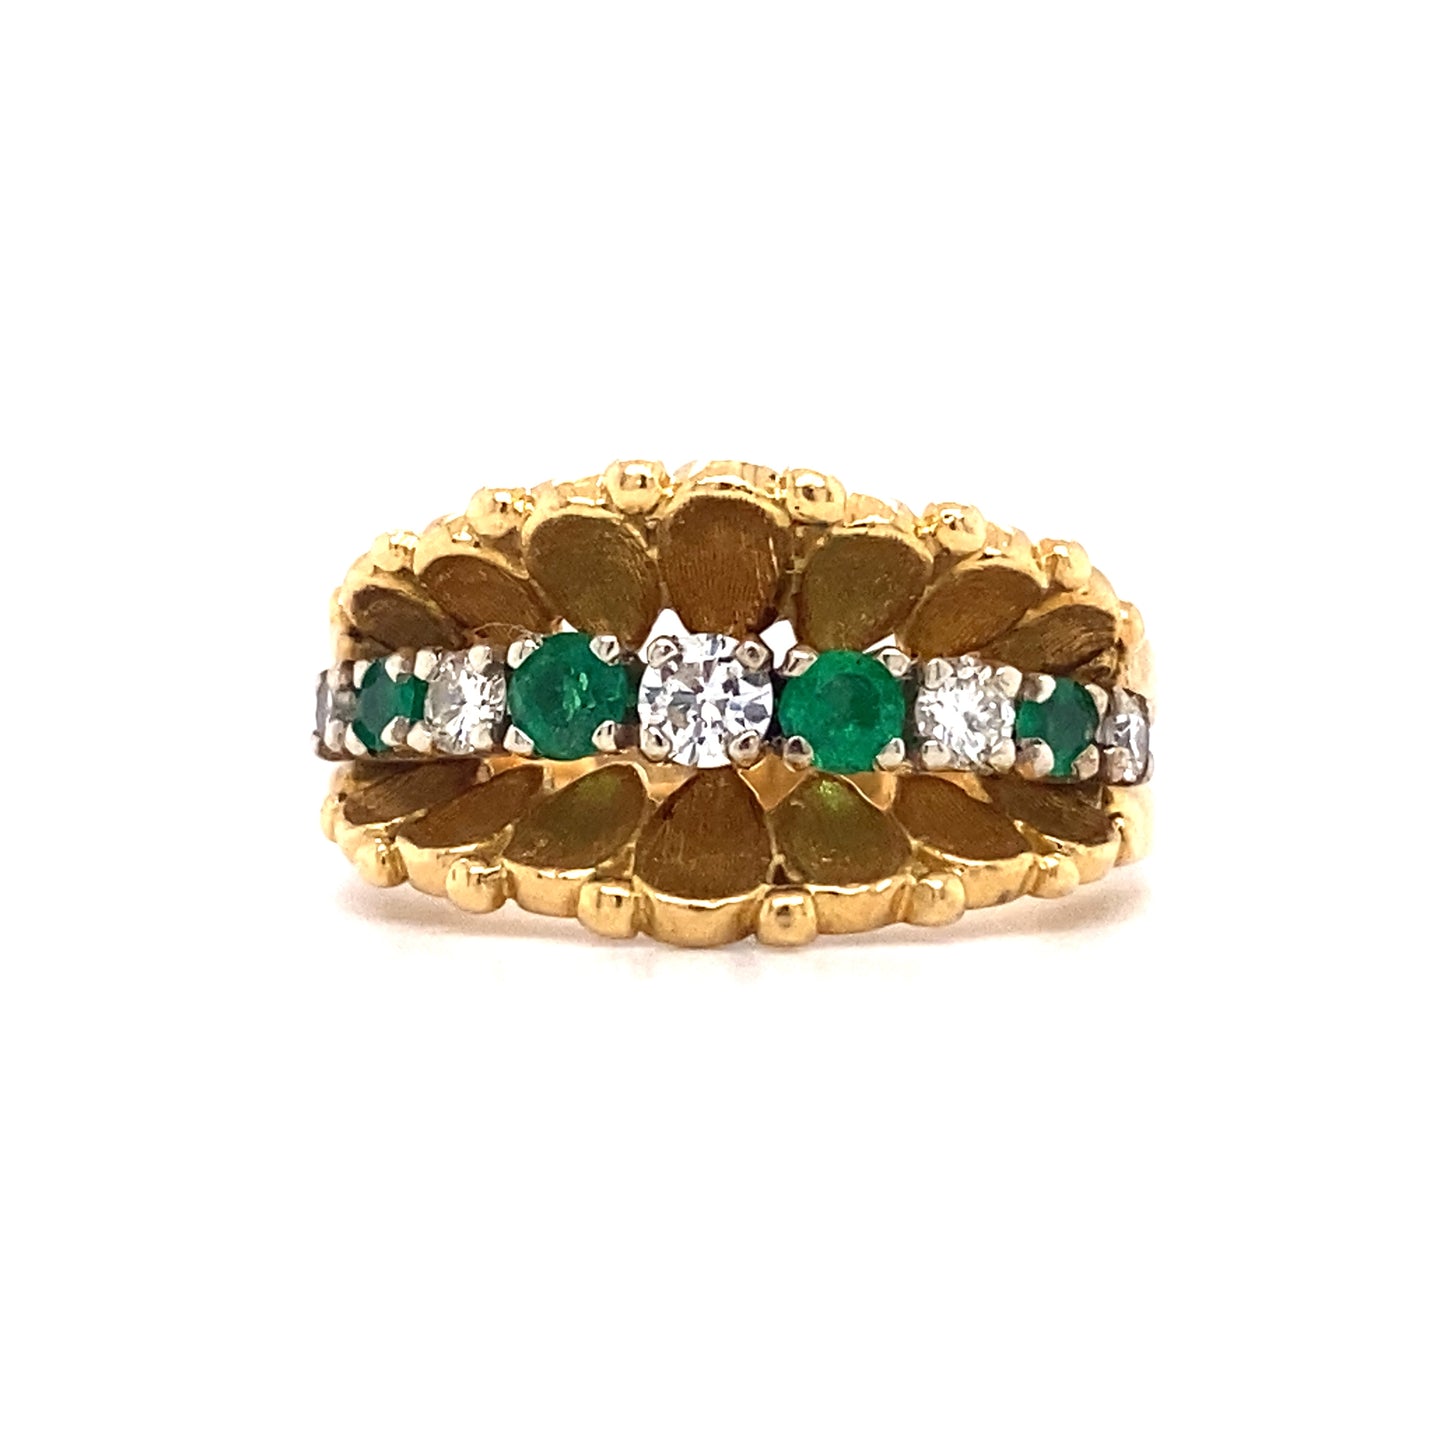 Circa 1980s Emerald and Diamond Scalloped Motif Ring in 18K Gold